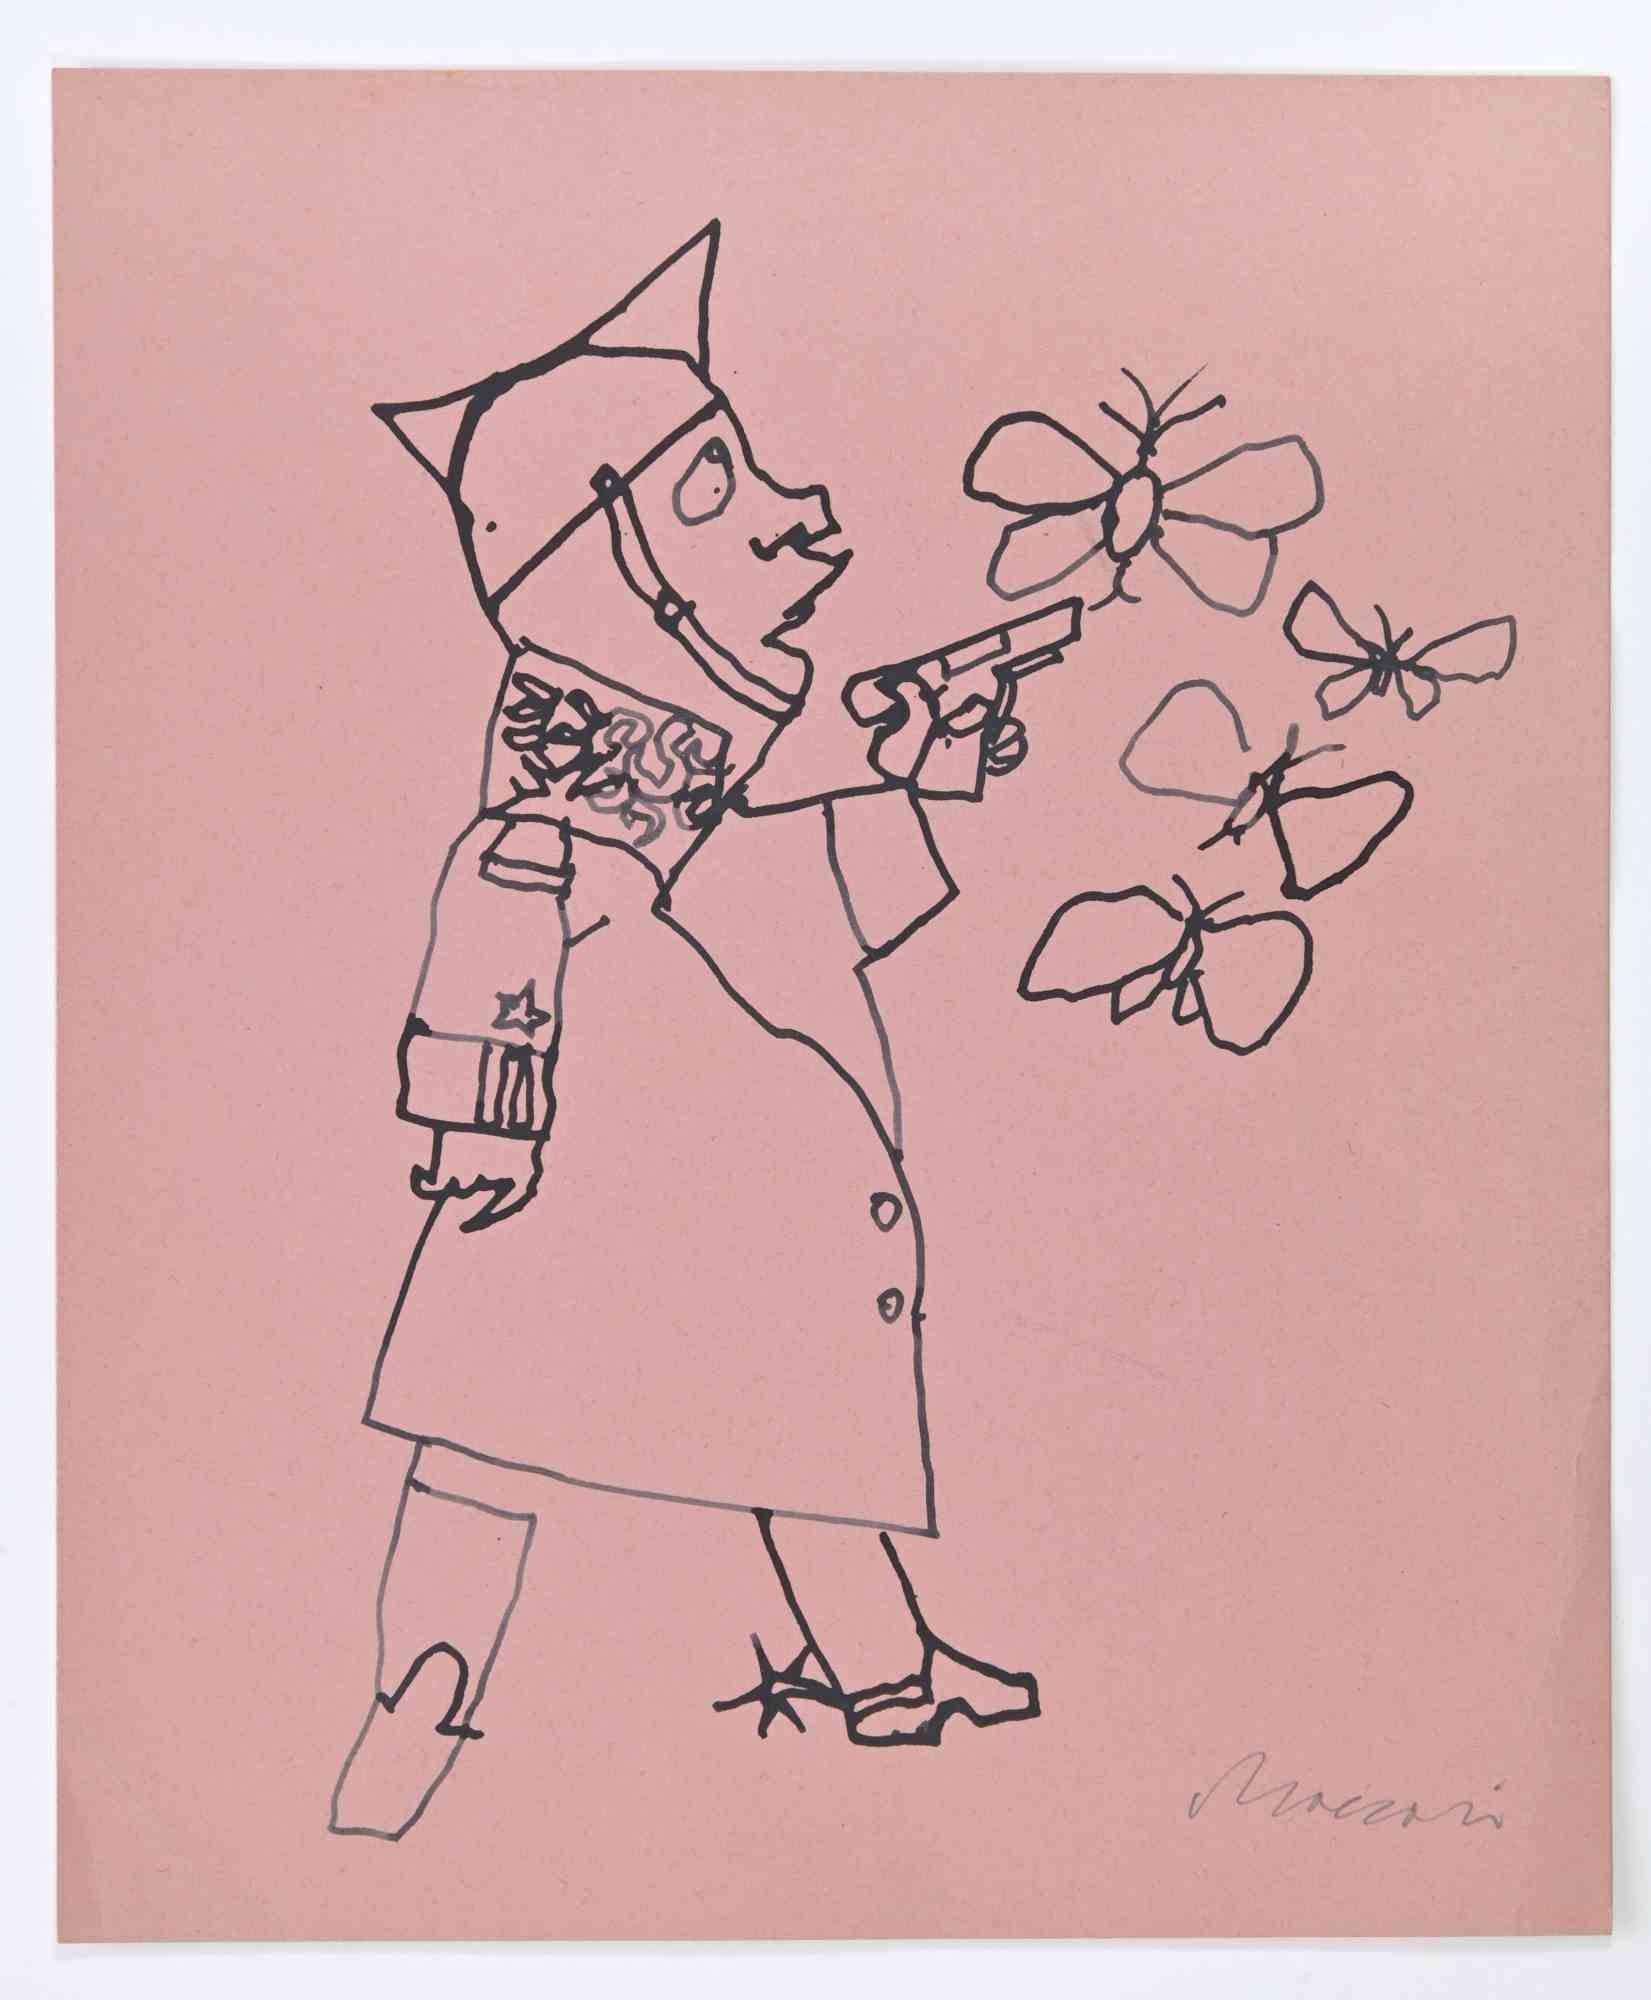 Soldier and Butterflies is a China Ink Drawing realized by Mino Maccari (1924-1989) in 1965.

Hand-signed on the lower margin.

Good condition.

Mino Maccari (Siena, 1924-Rome, June 16, 1989) was an Italian writer, painter, engraver and journalist,